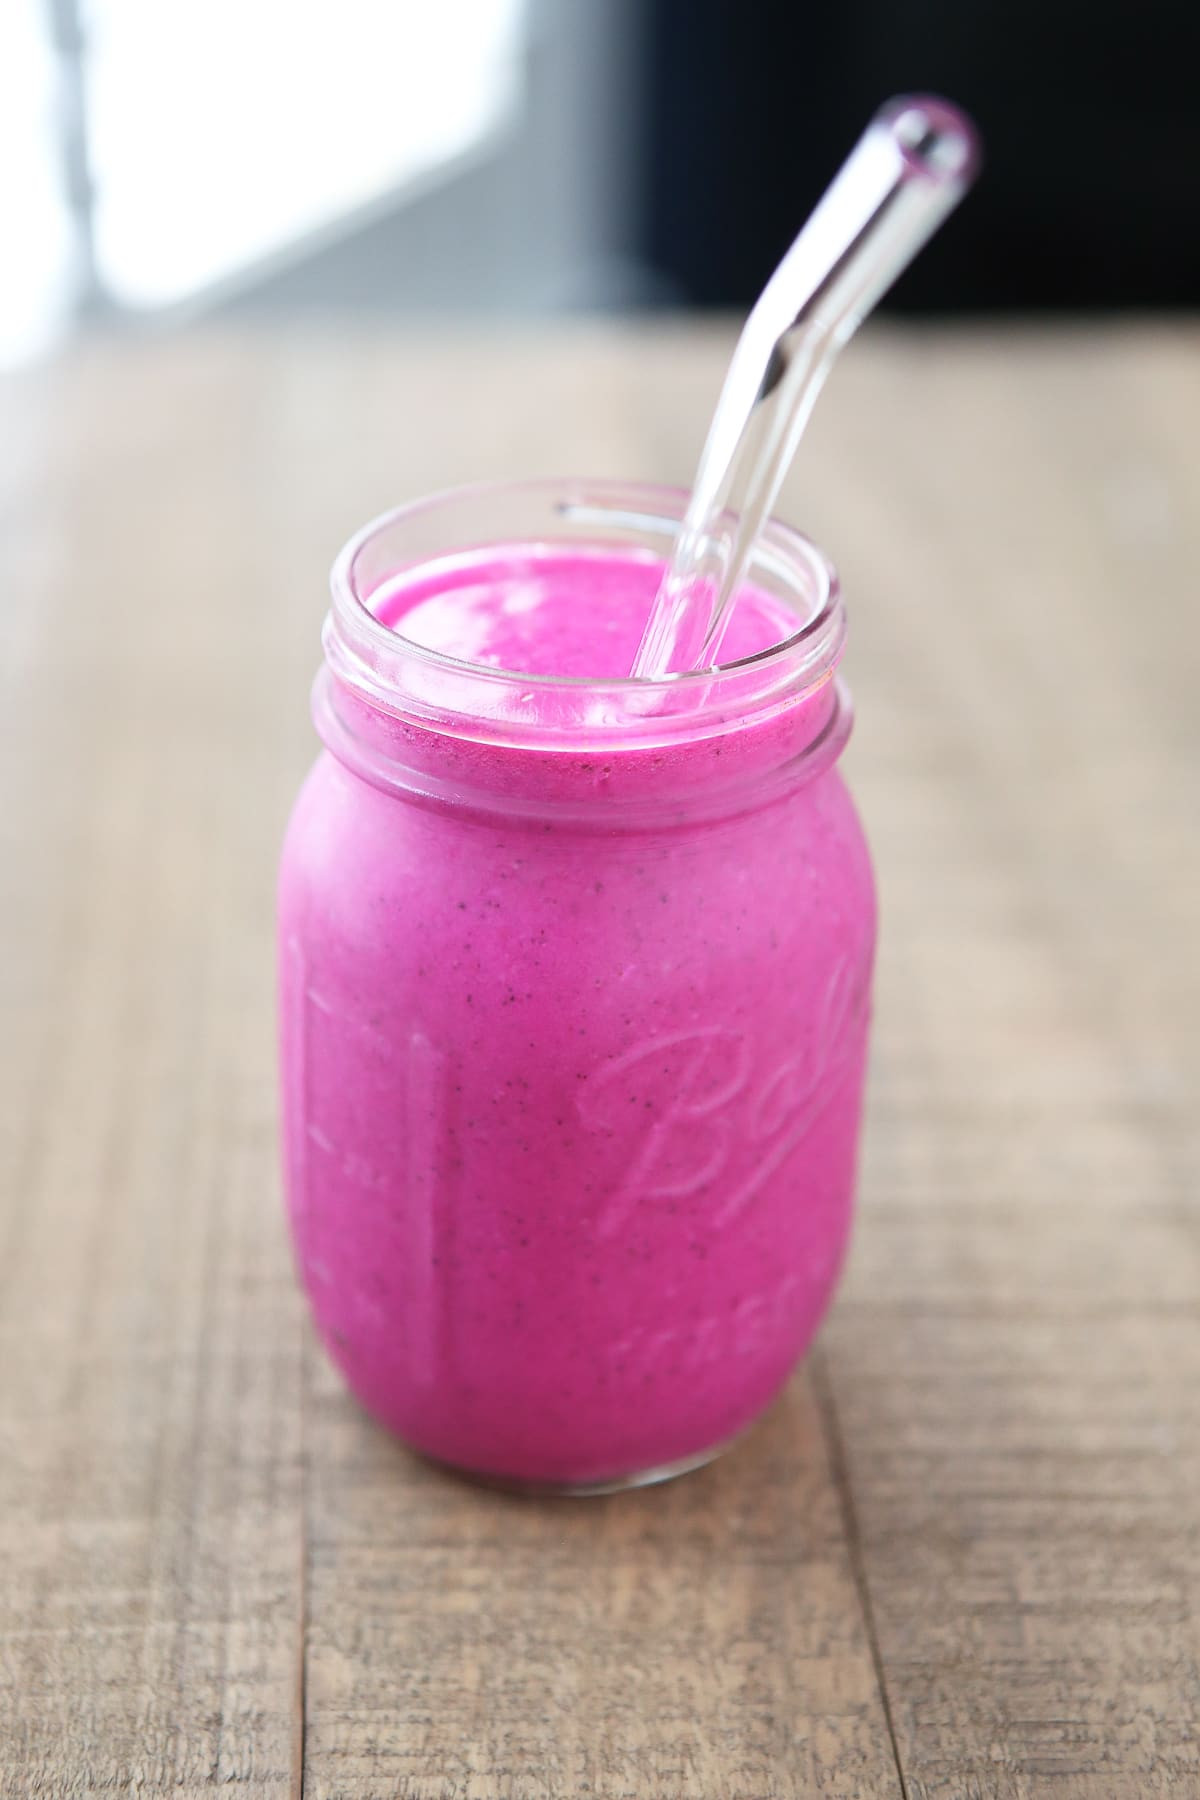 Dragon Fruit Smoothie Recipes
 Hydrating Dragon Fruit Smoothie and My Essential 7 For